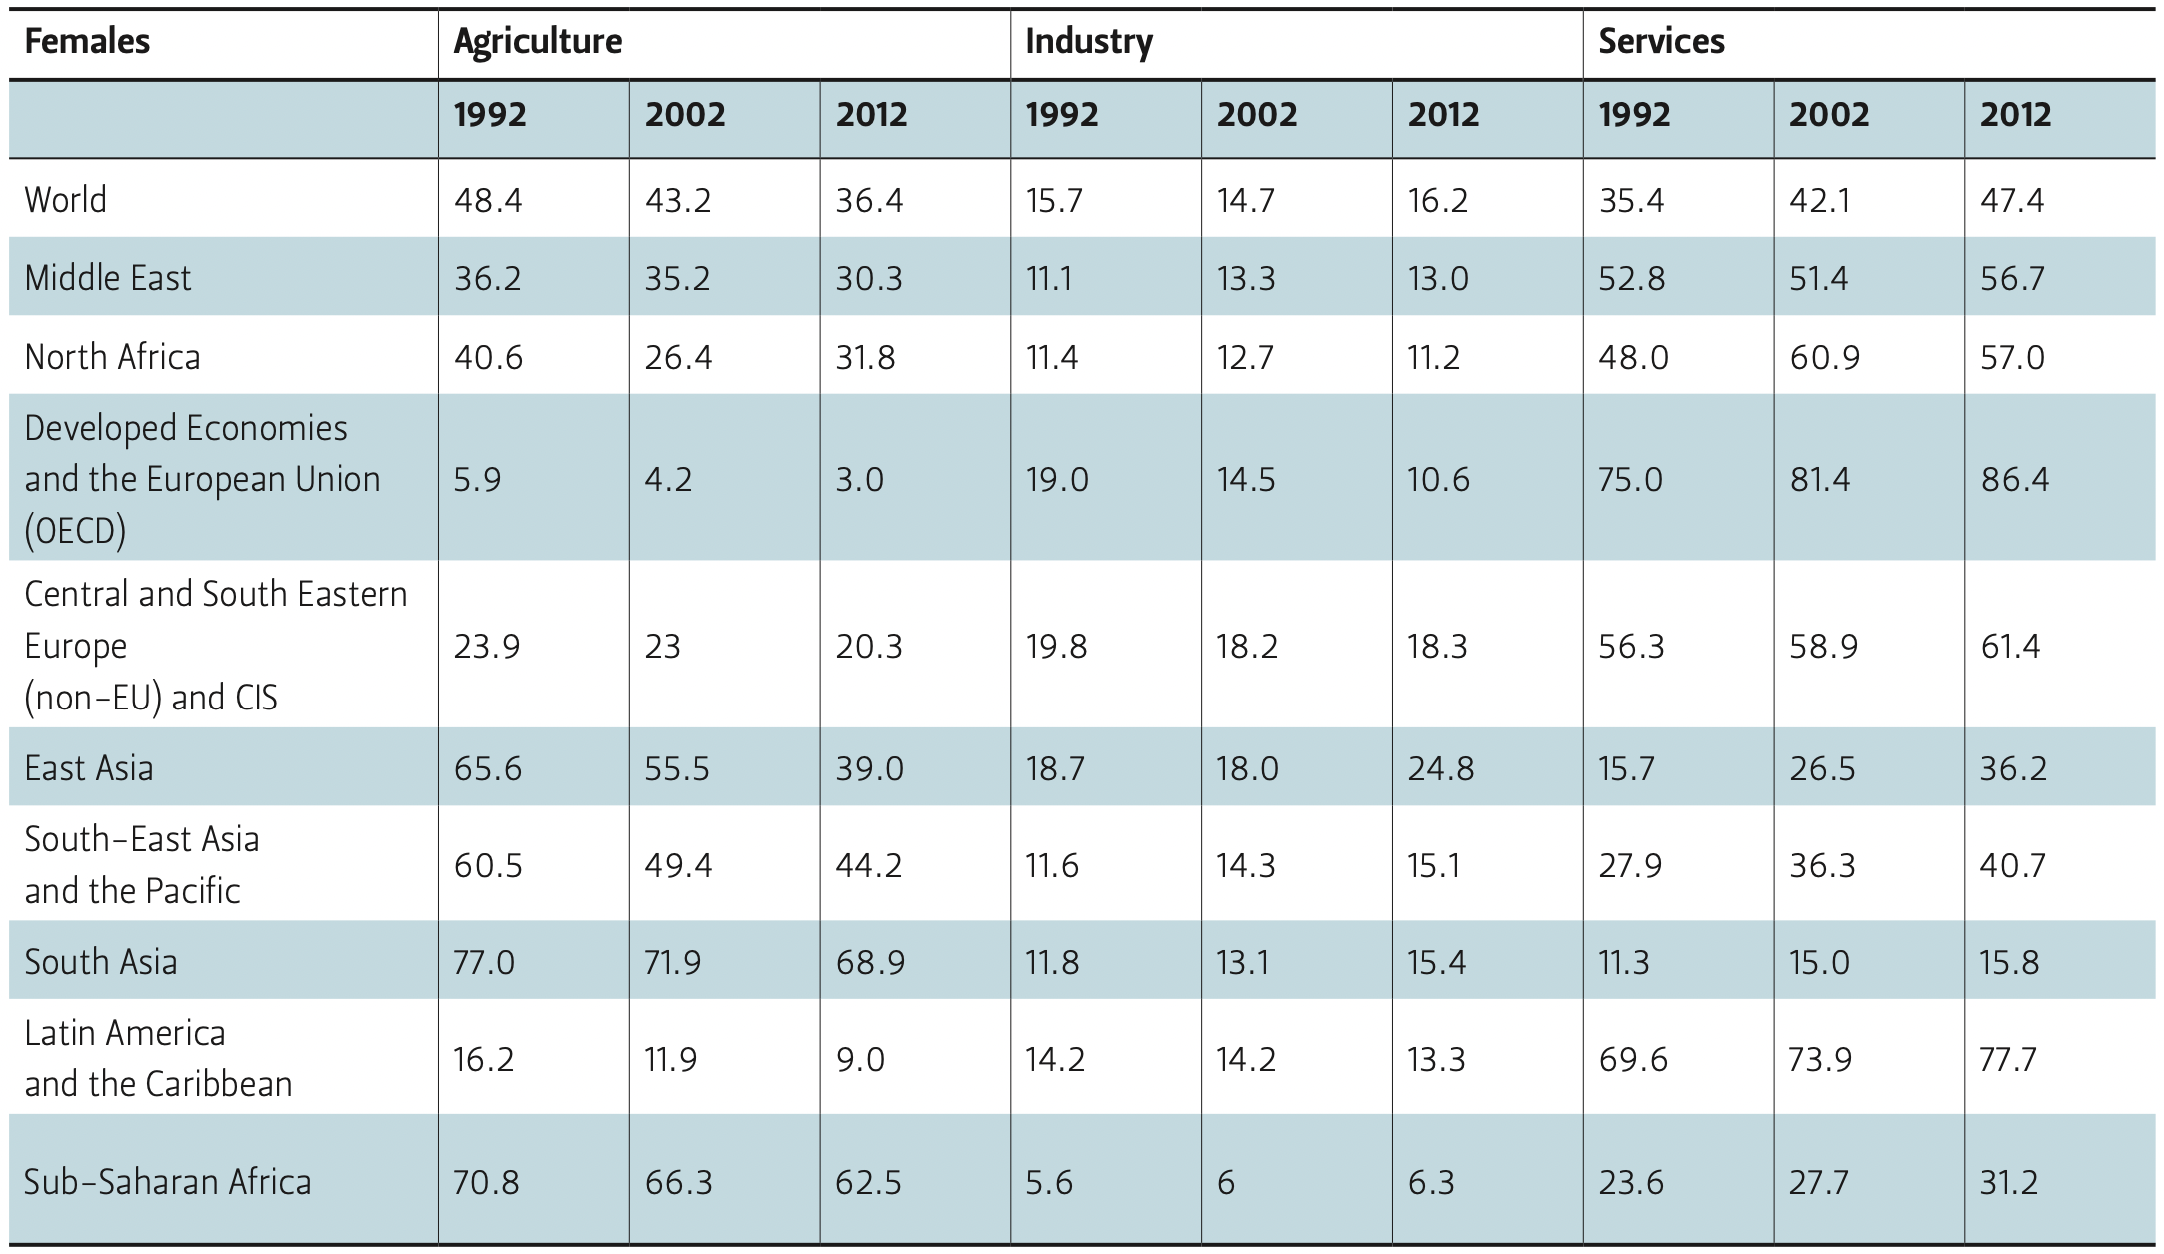 This table compares female employment shares by economic sector over time.